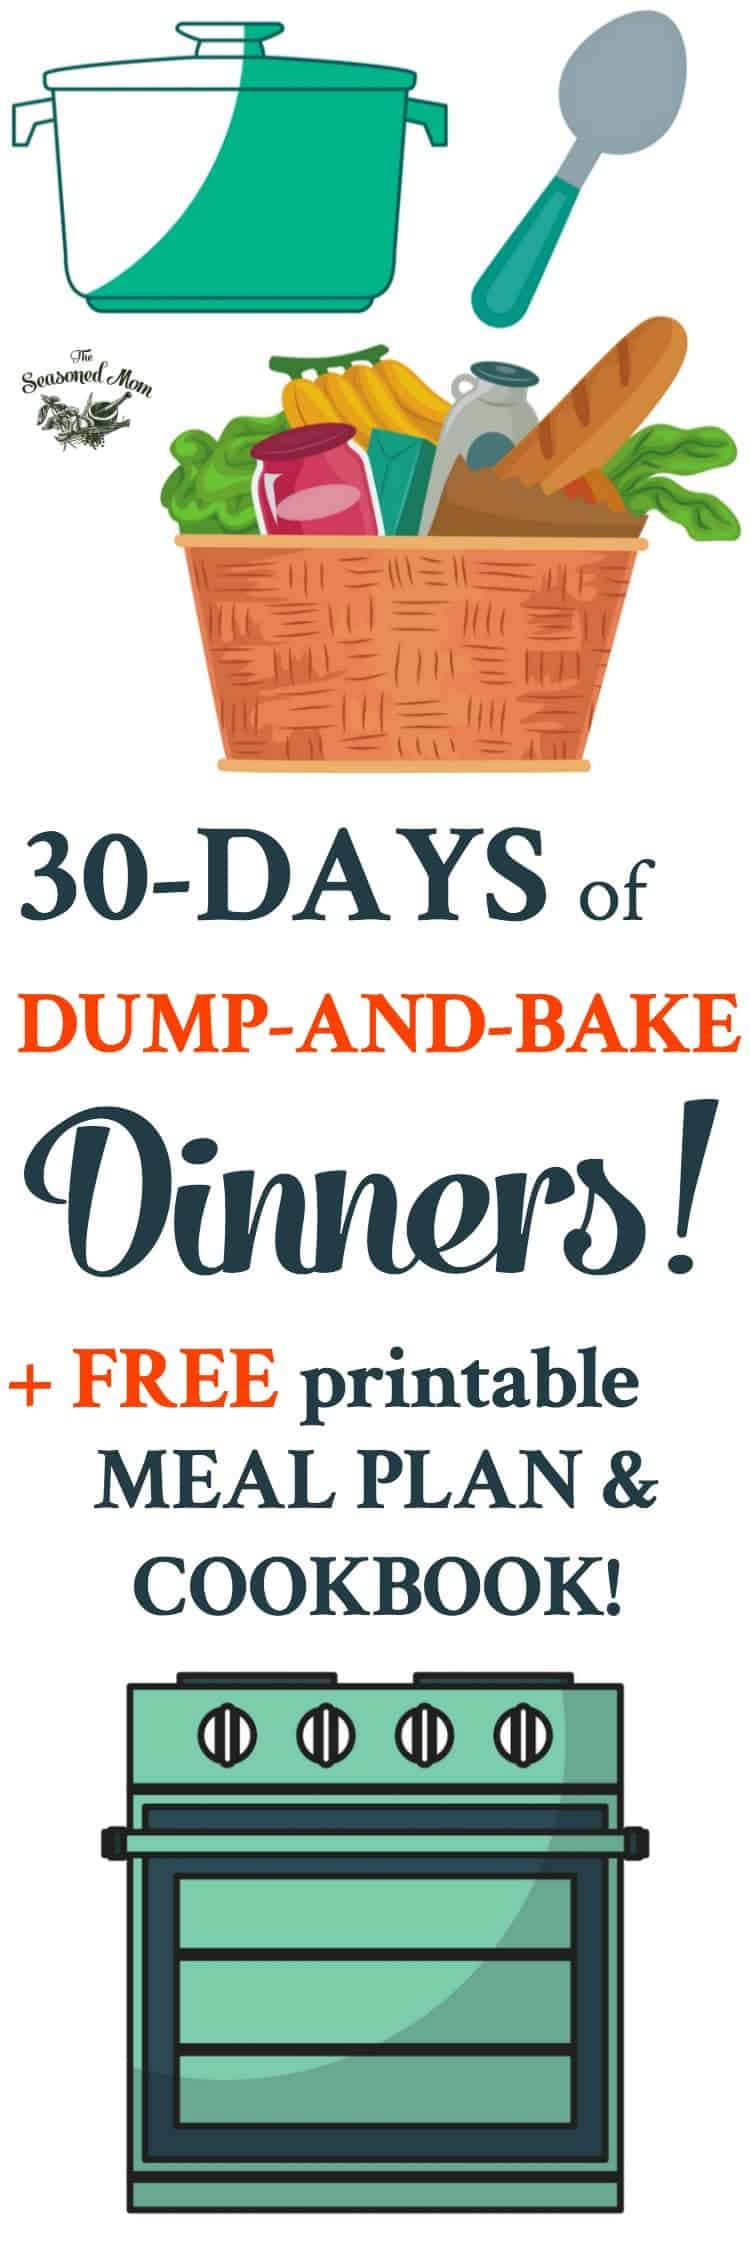 30 Days of Dump-and-Bake Dinners! Meal Planning | Meal Prep | Easy Dinner Recipes | Dinner Ideas | Casserole Recipes | Dump and Go Recipes | Chicken Breast Recipes | Pasta Recipes | 5 Ingredient of Less Dinner Recipes